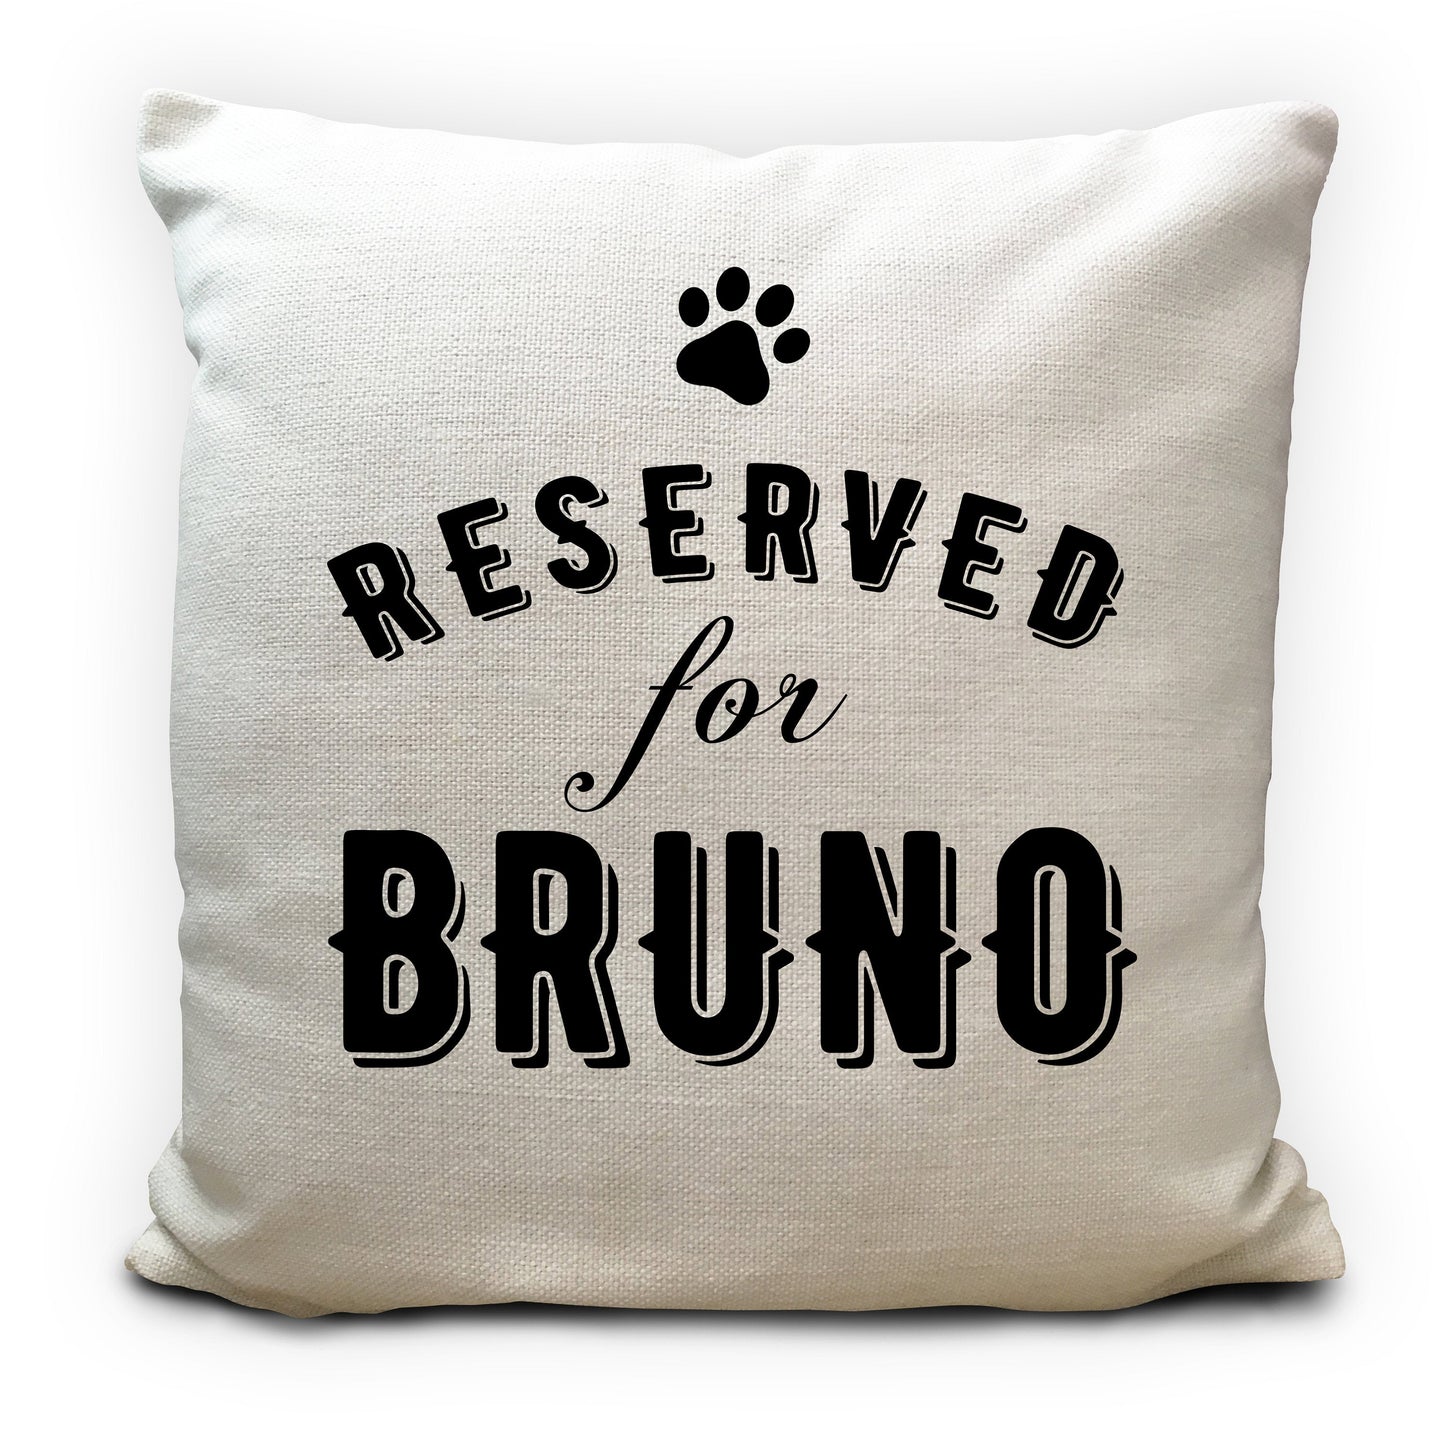 Personalised Pet Name Dog Bed Cushion Cover 40cm 16"